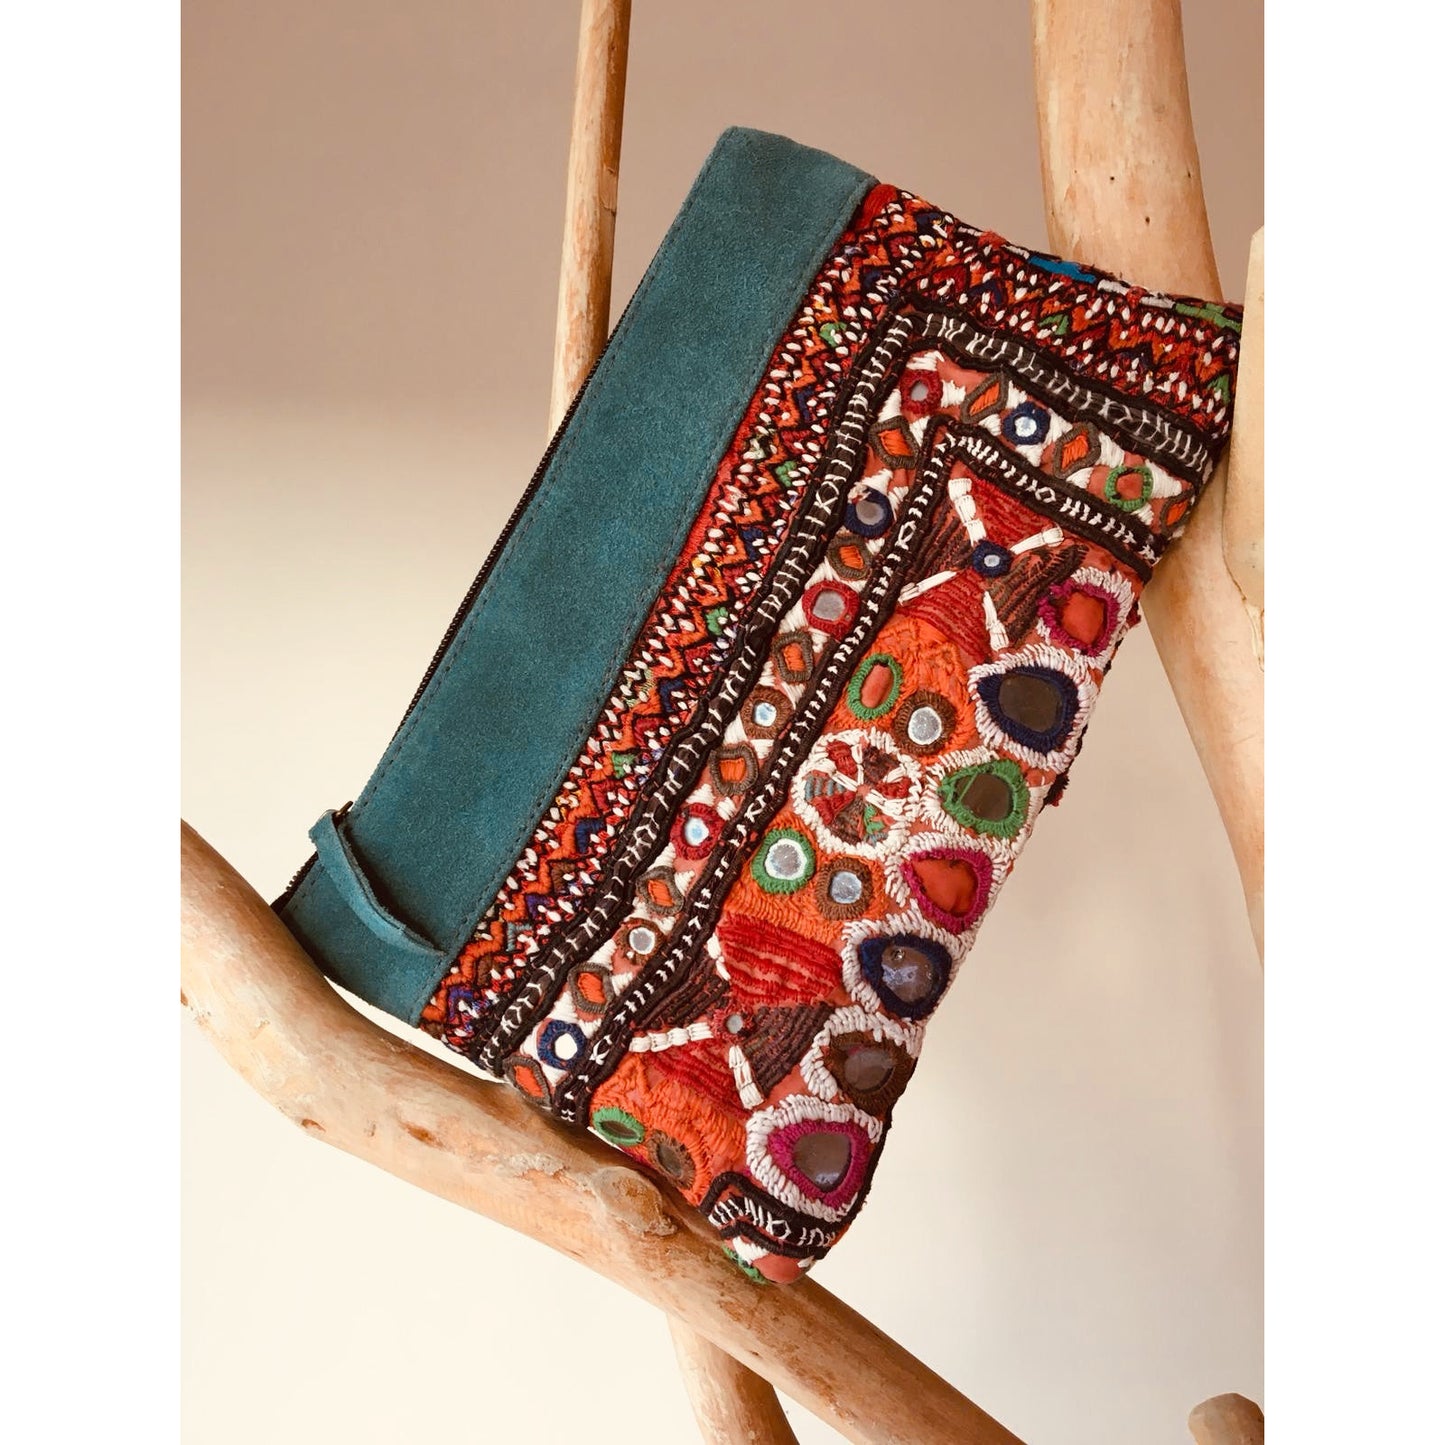 Vintage Indian suede trimmed clutch bags